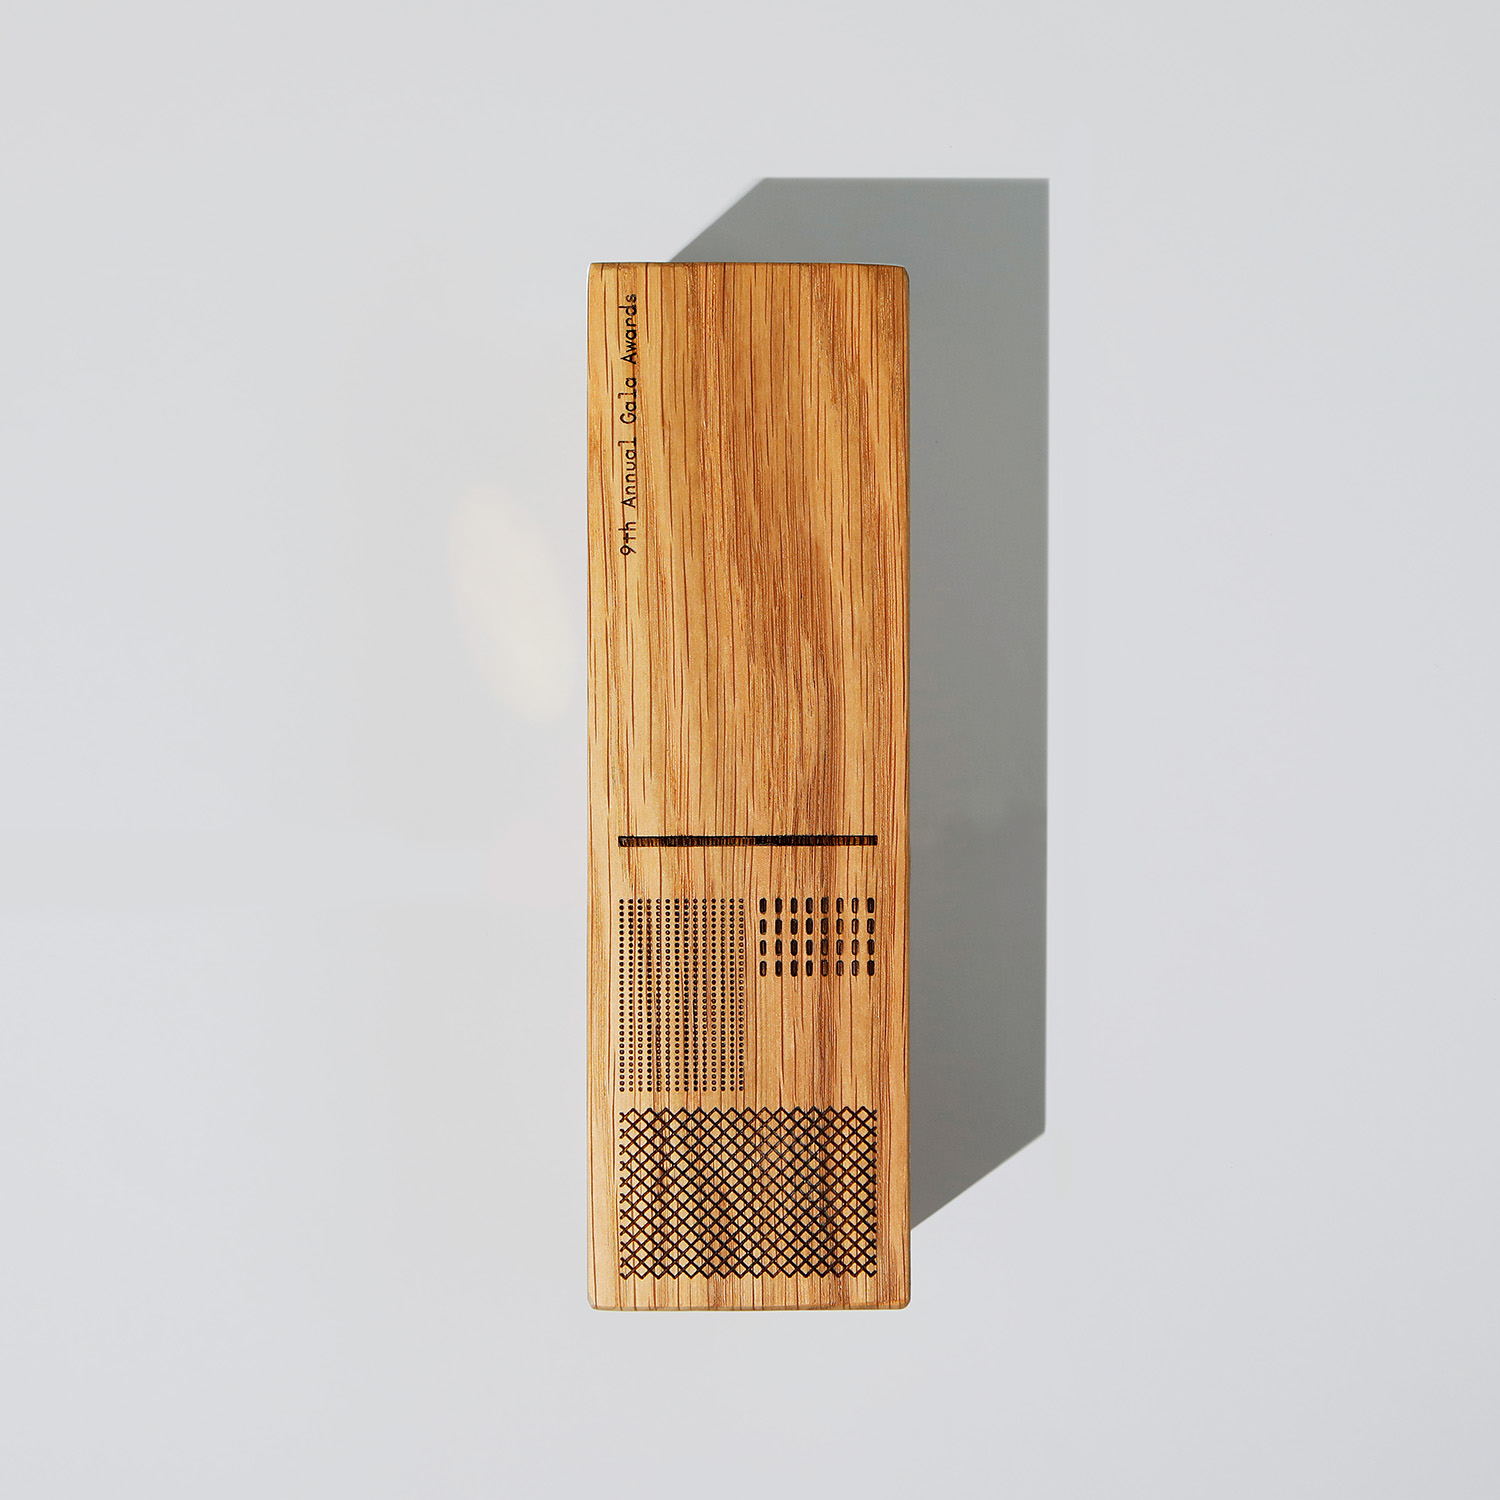 Wood trophy design for Career Trackers by Garbett